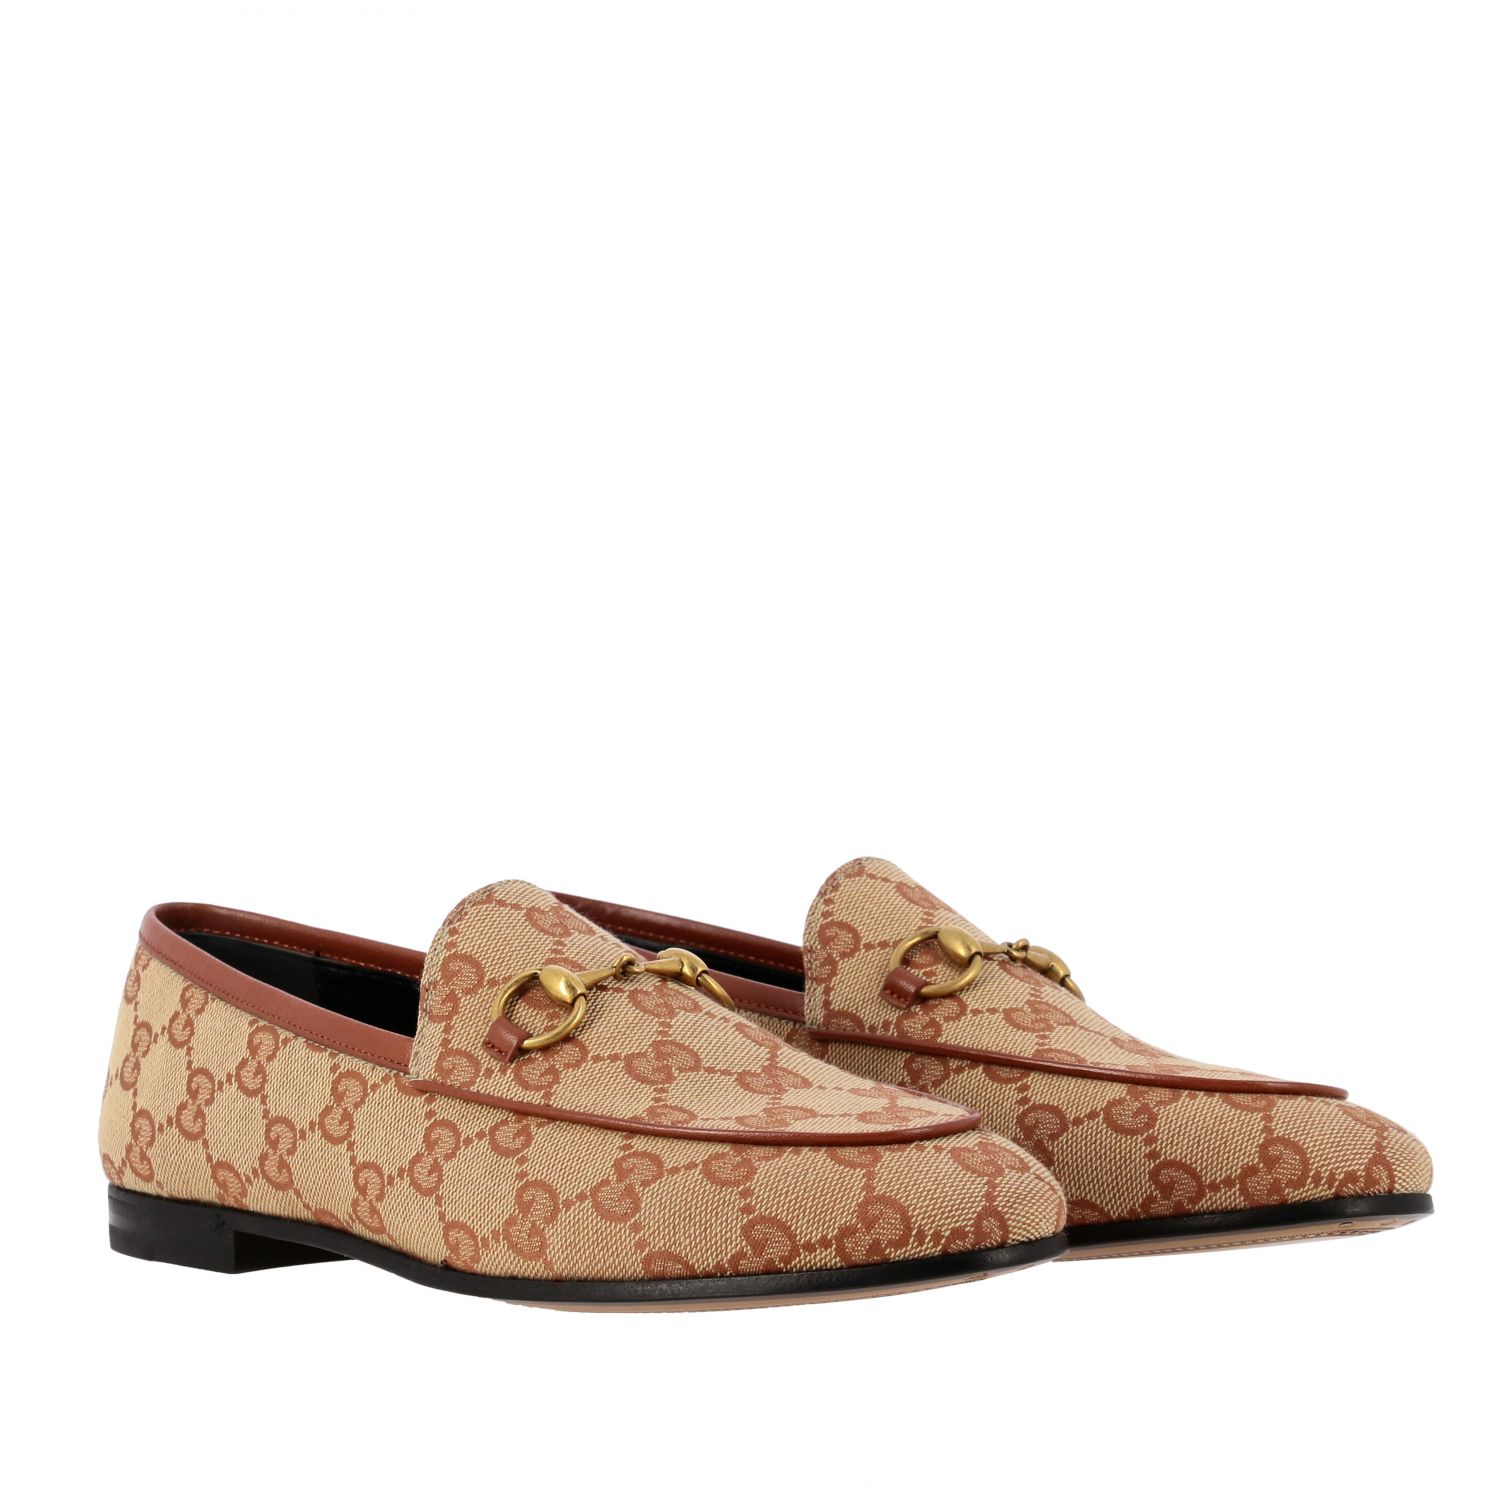 GUCCI: Jordan GG Supreme moccasin with horsebit - Beige | Gucci loafers ...